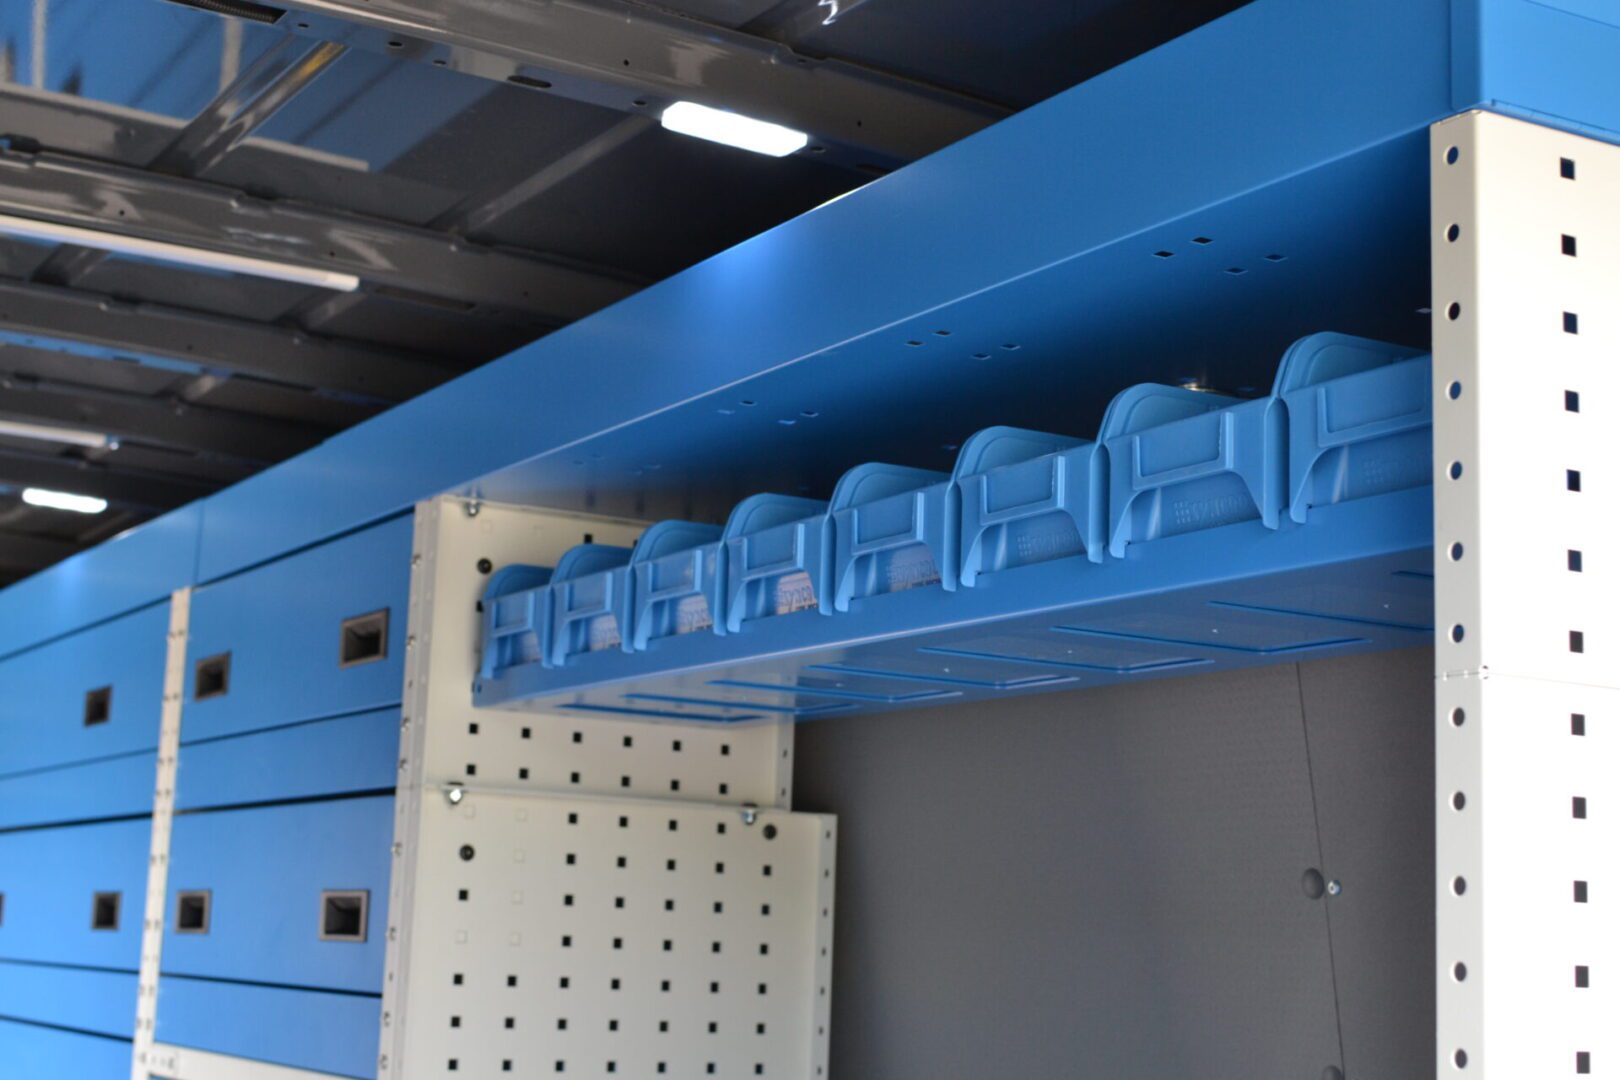 MAN racking system drivers side view shows top tray and storage bins